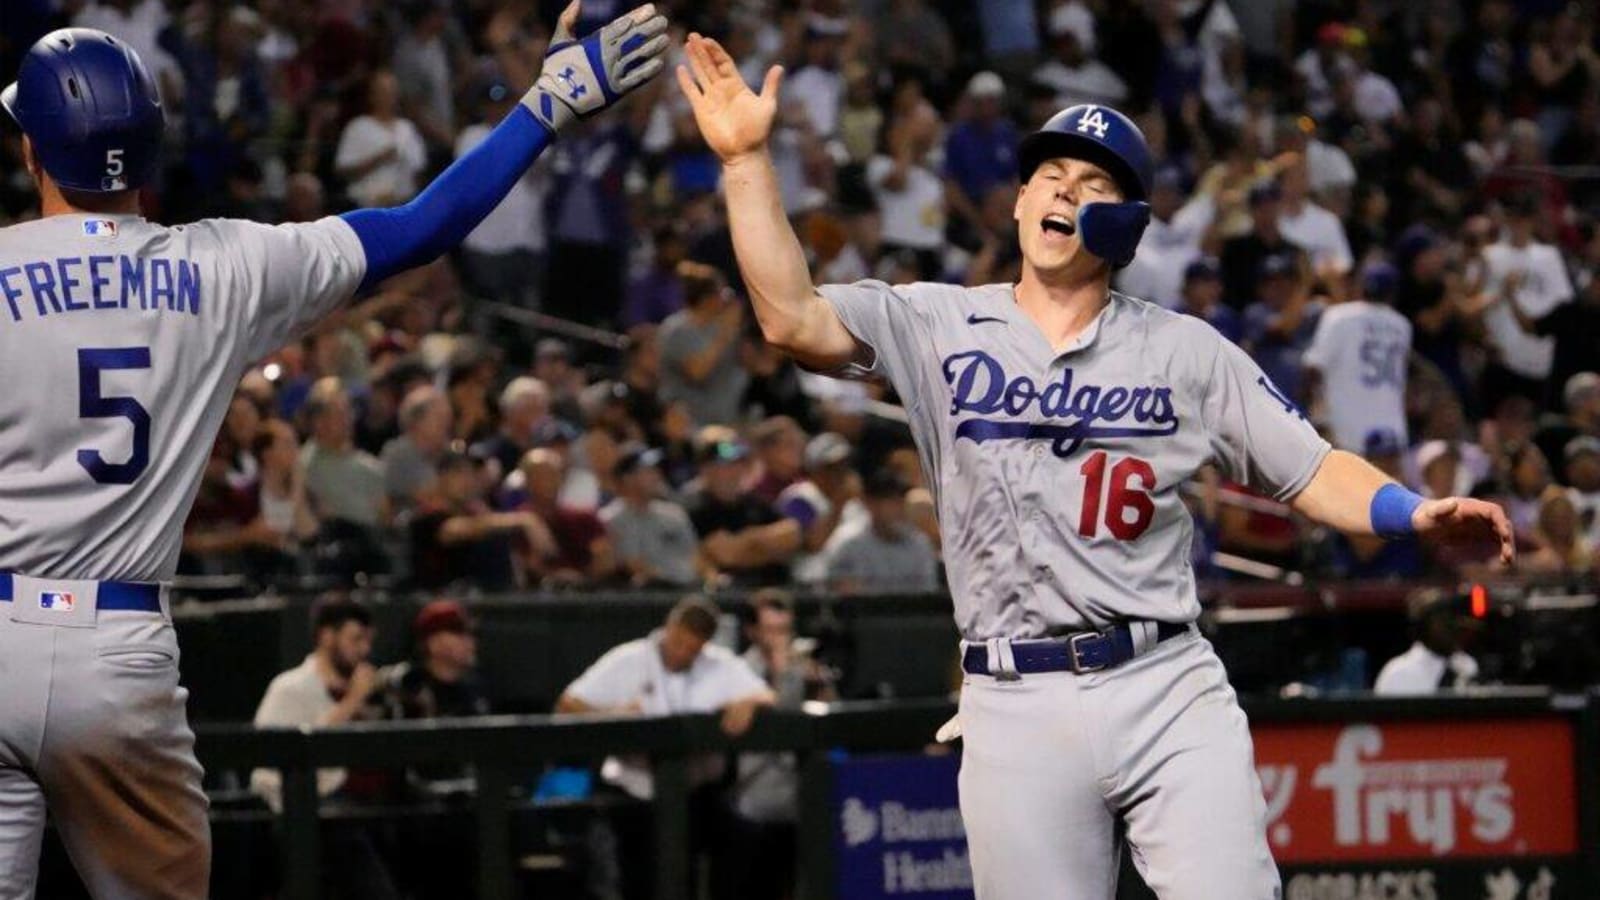 Los Angeles Dodgers vs Colorado Rockies watch 2023 MLB in free live stream, start time and TV channel Yardbarker